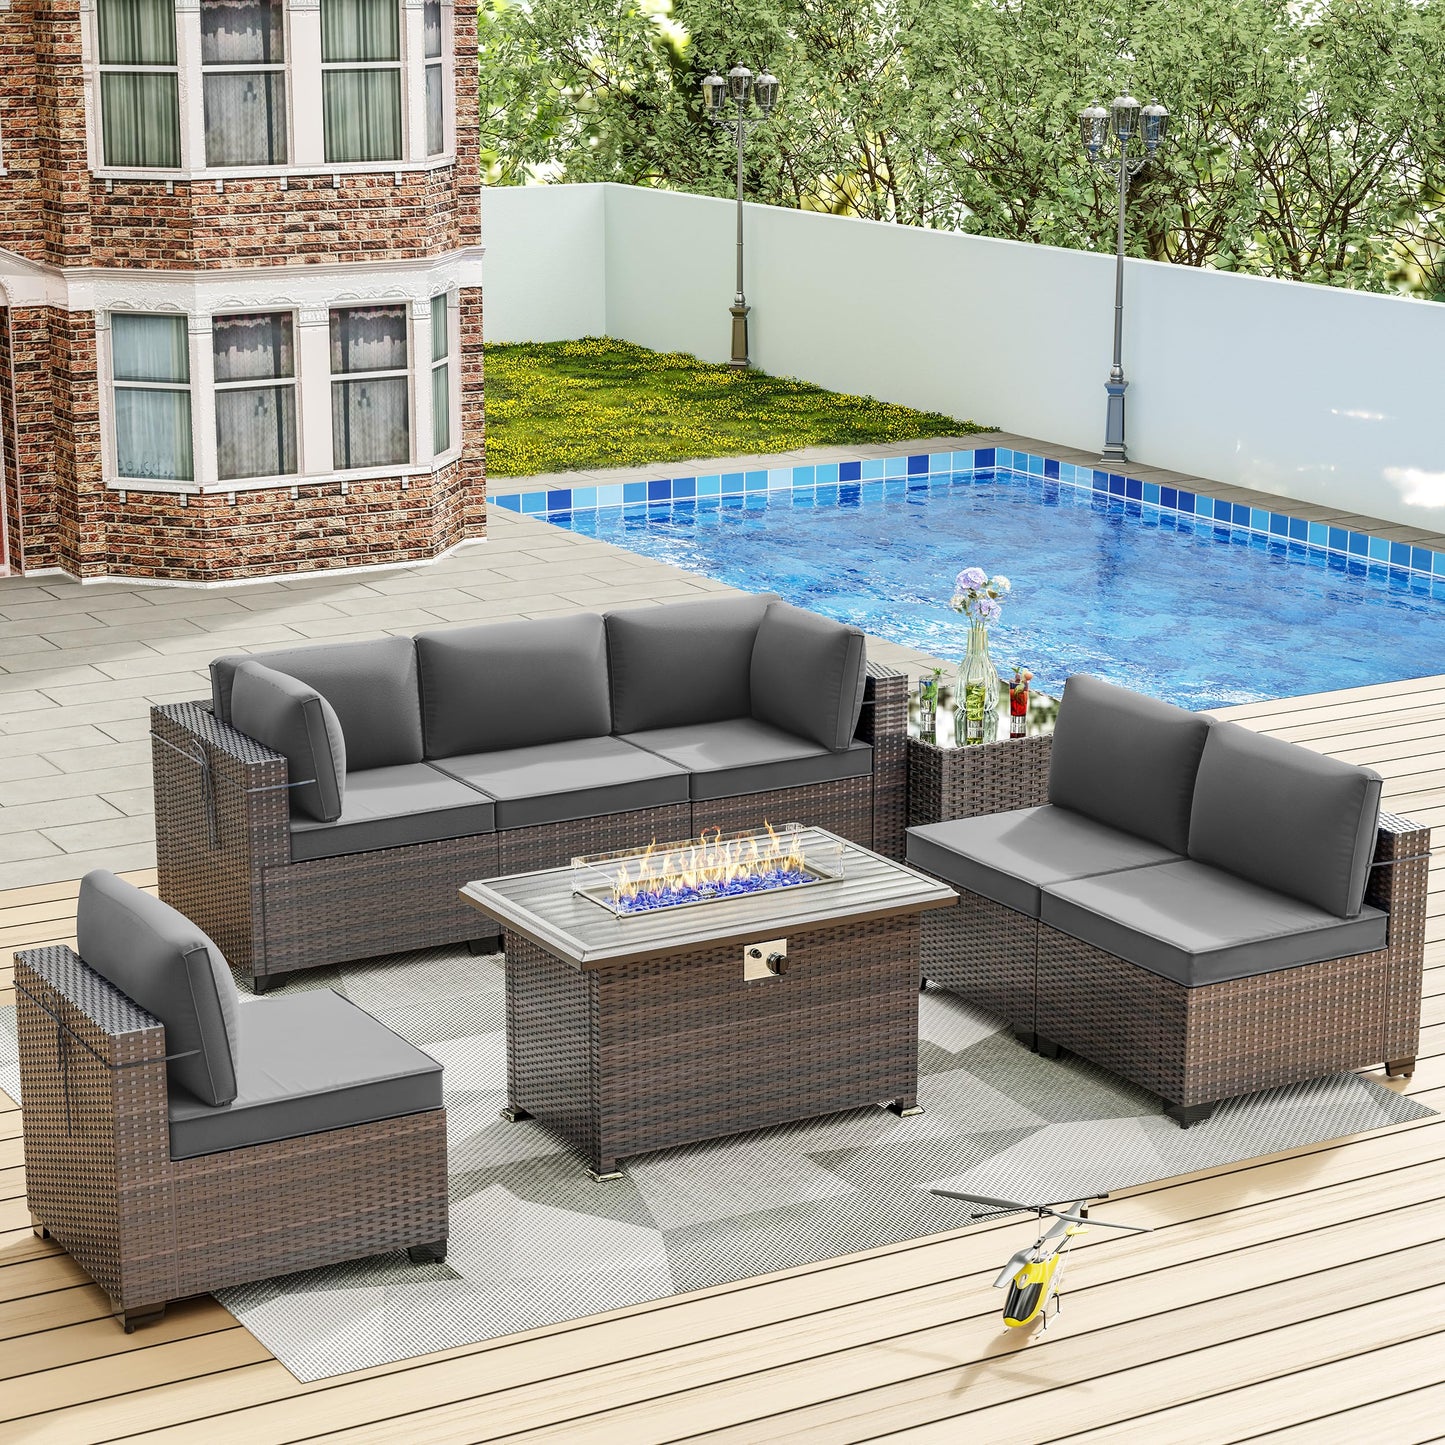 ALAULM 8 Pieces Outdoor Patio Furniture Set with Propane Fire Pit Table Outdoor Sectional Sofa Sets (Grey)